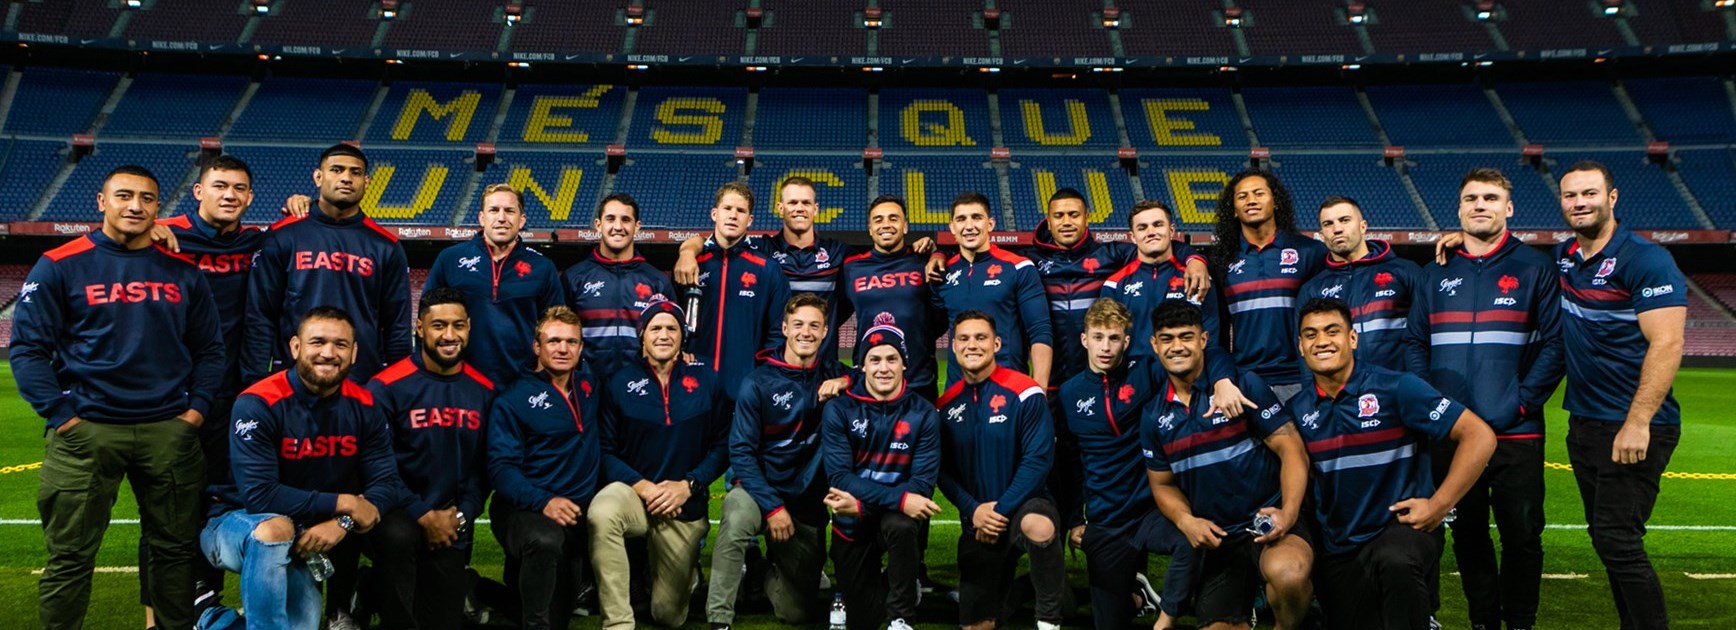 The Roosters visit to Camp Nou.